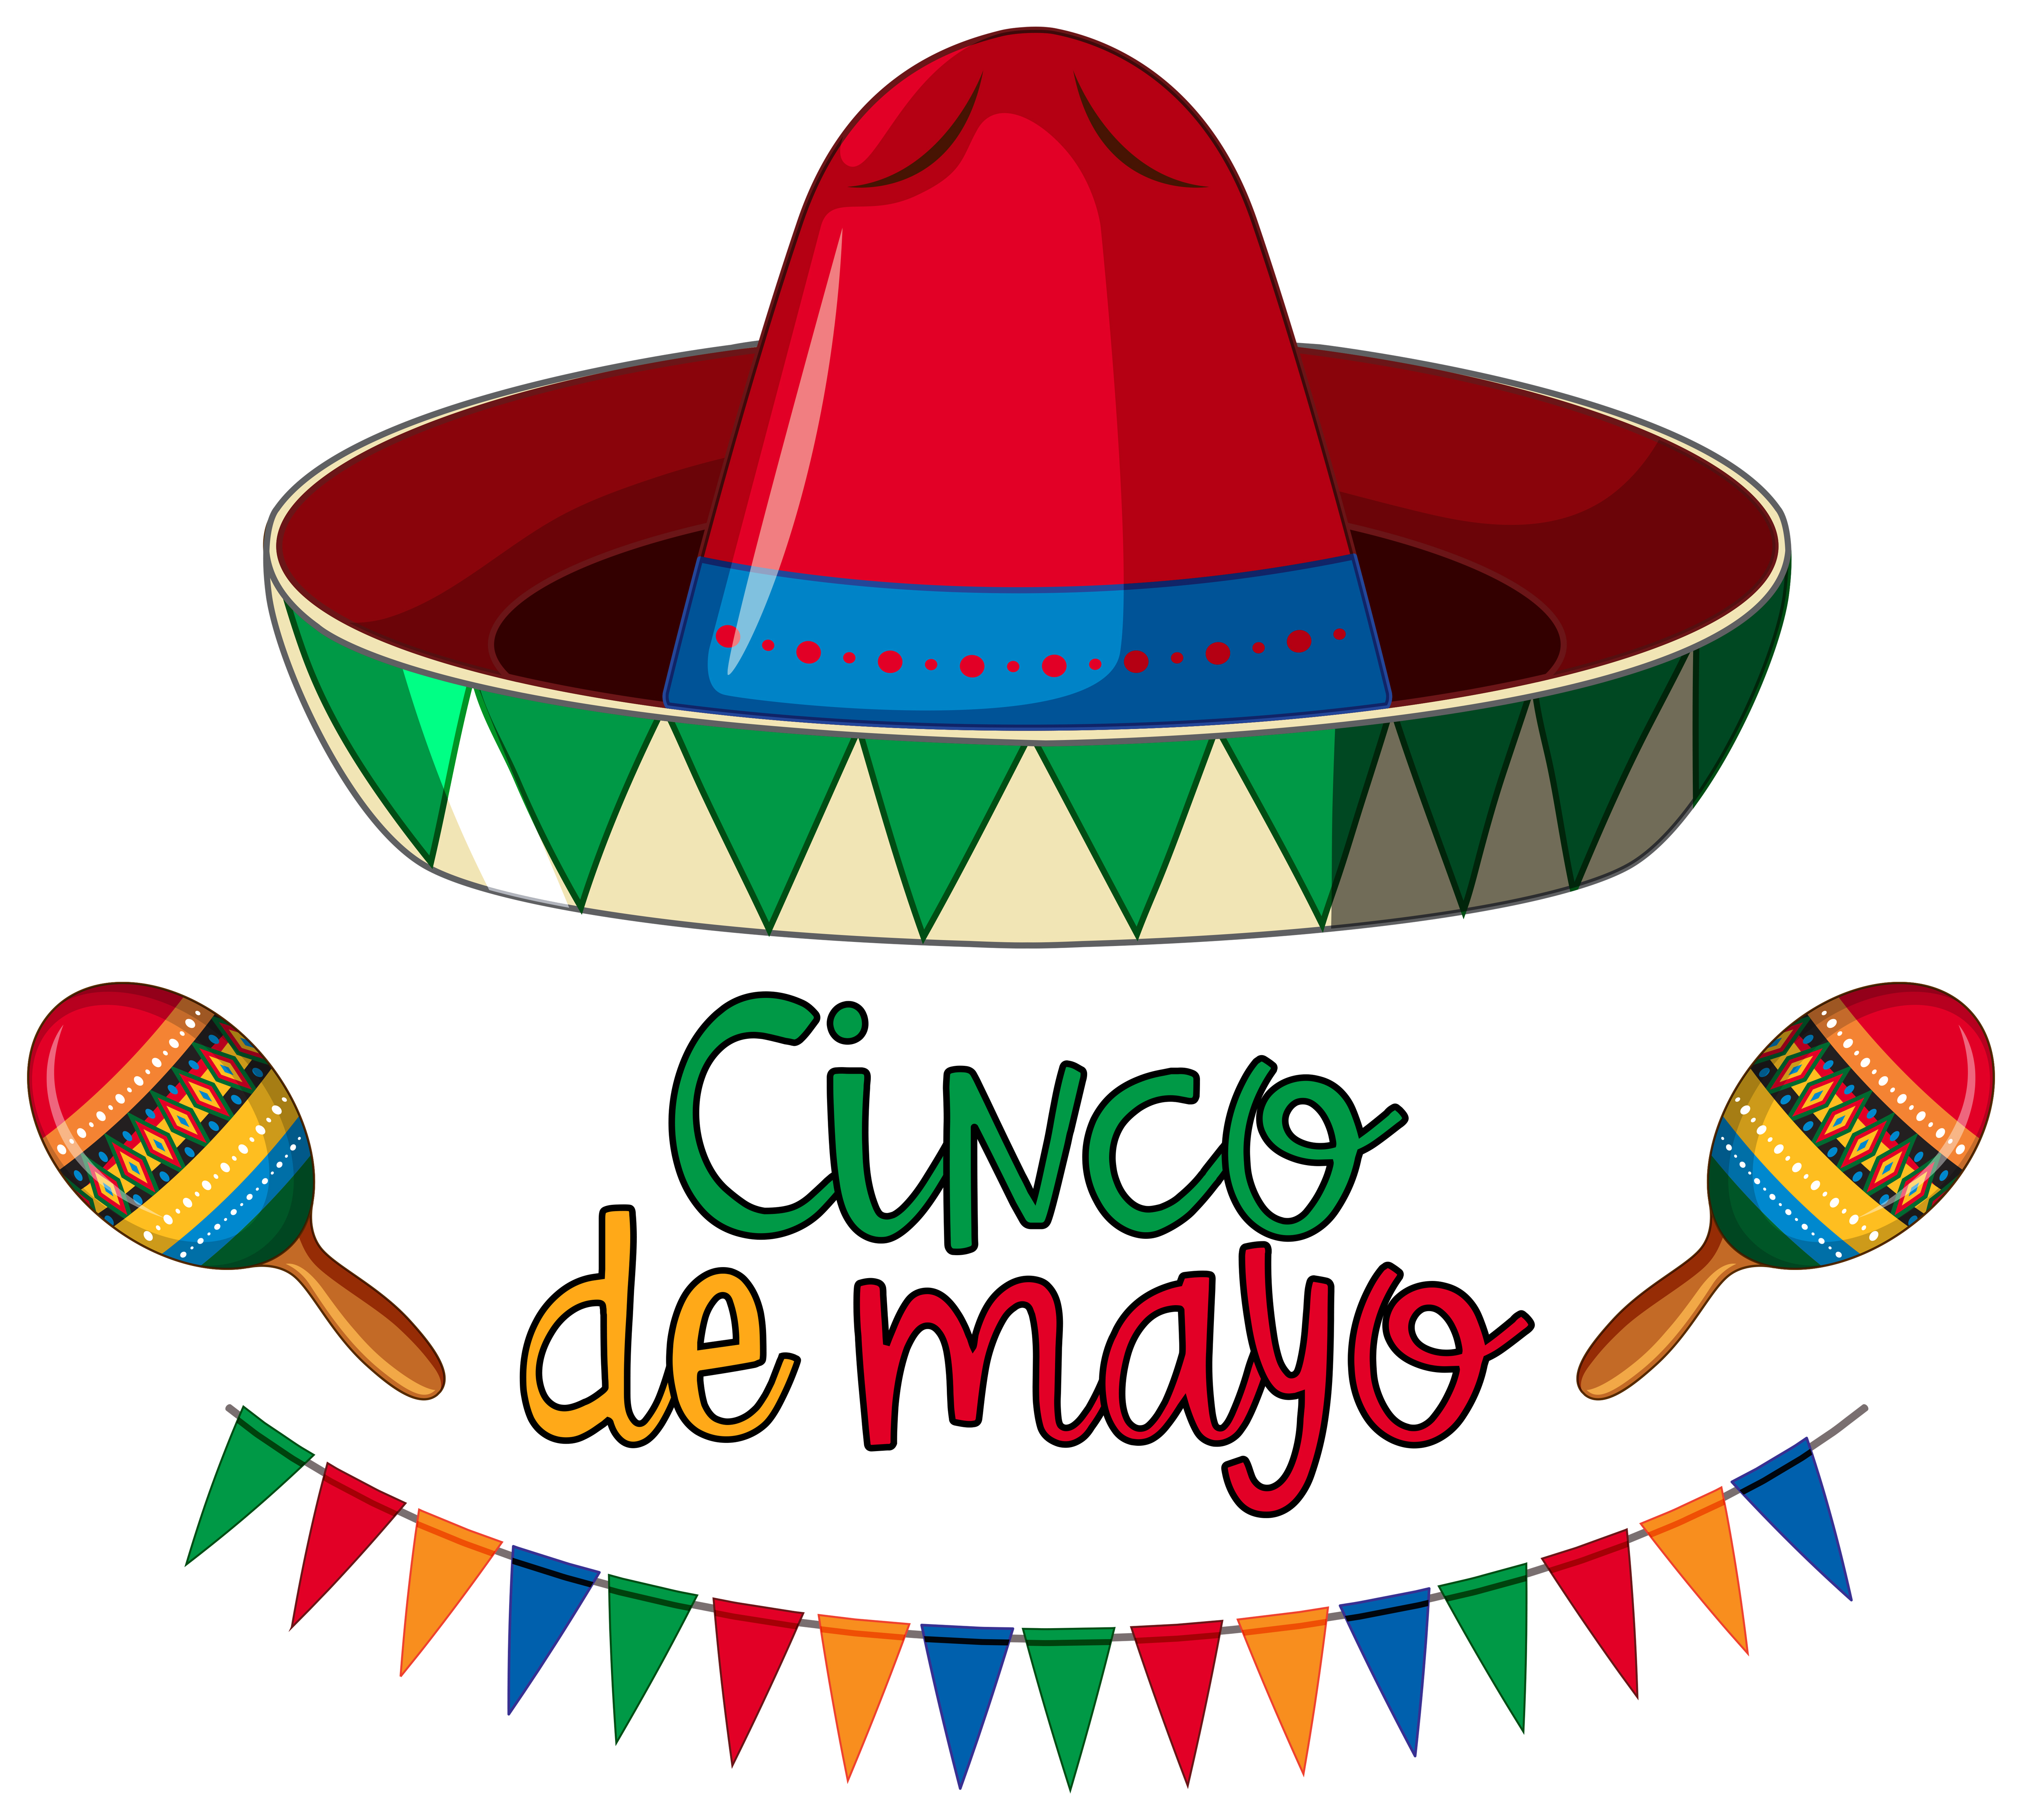 Cinco de mayo card template with red hat and colorful flags 448659